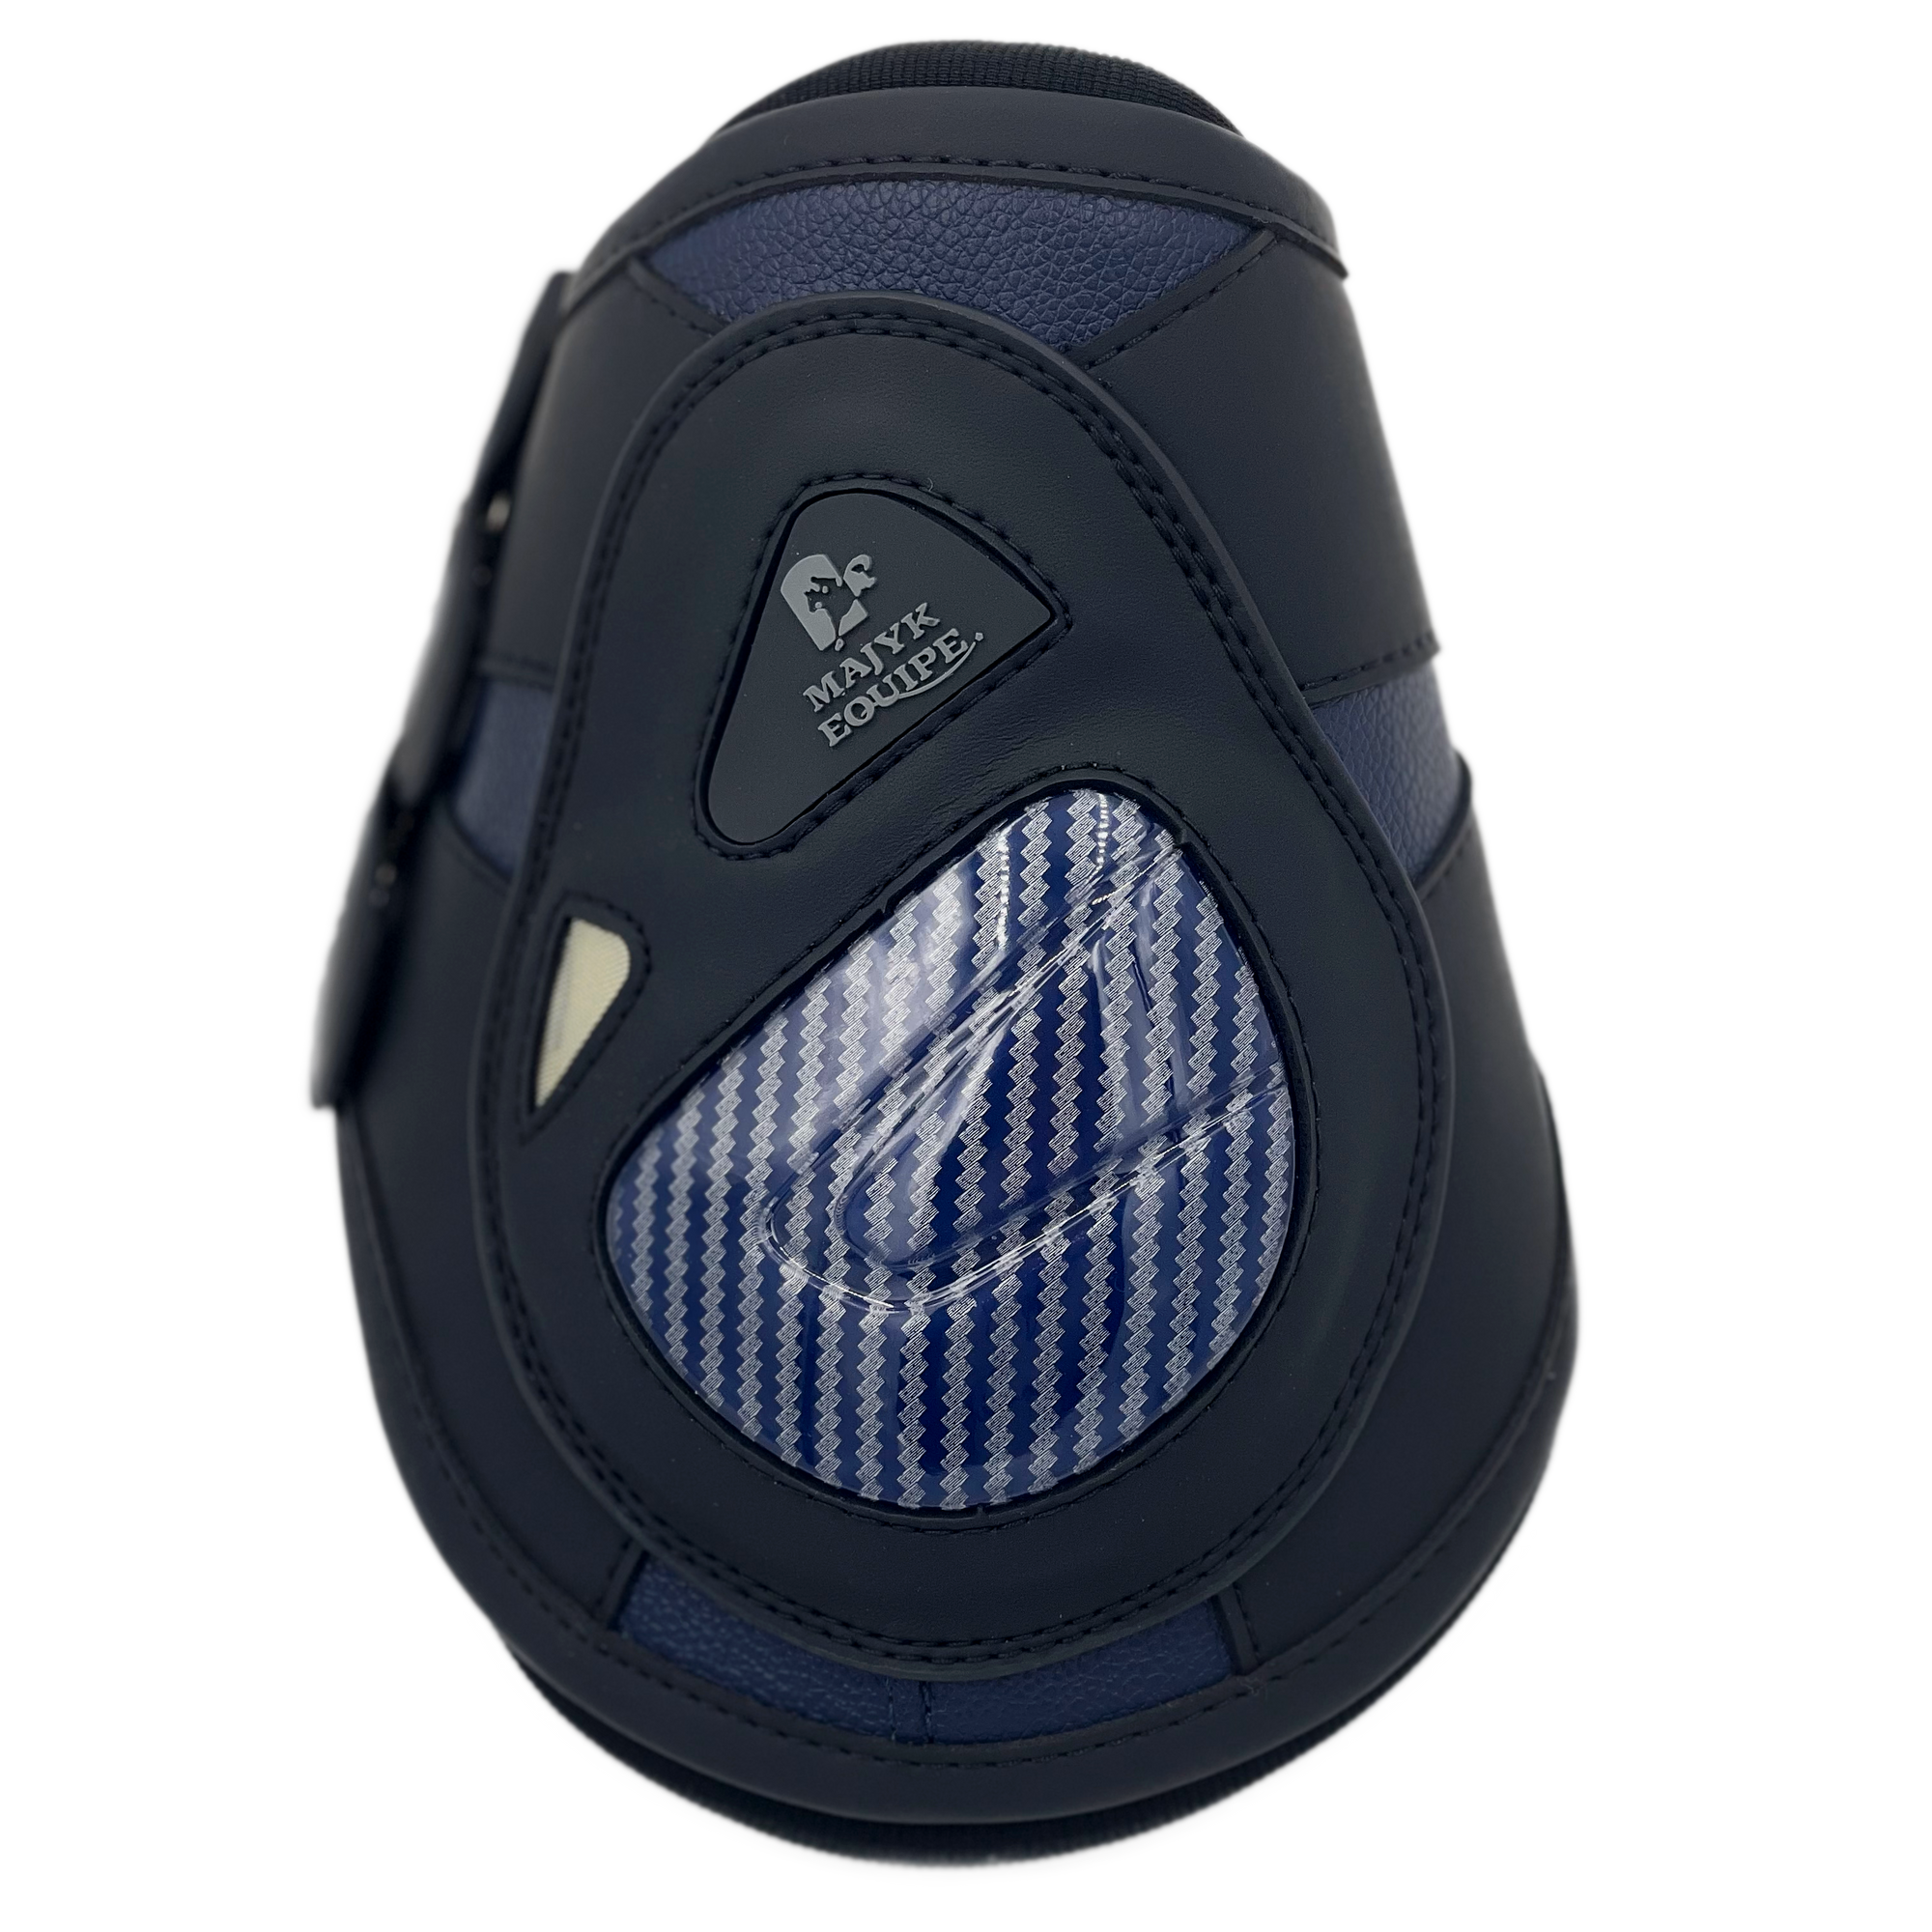 Majyk Equipe Bionic Fetlock Boot With Hybrid Technology - PRE ORDER ONLY - Majyk Equipe